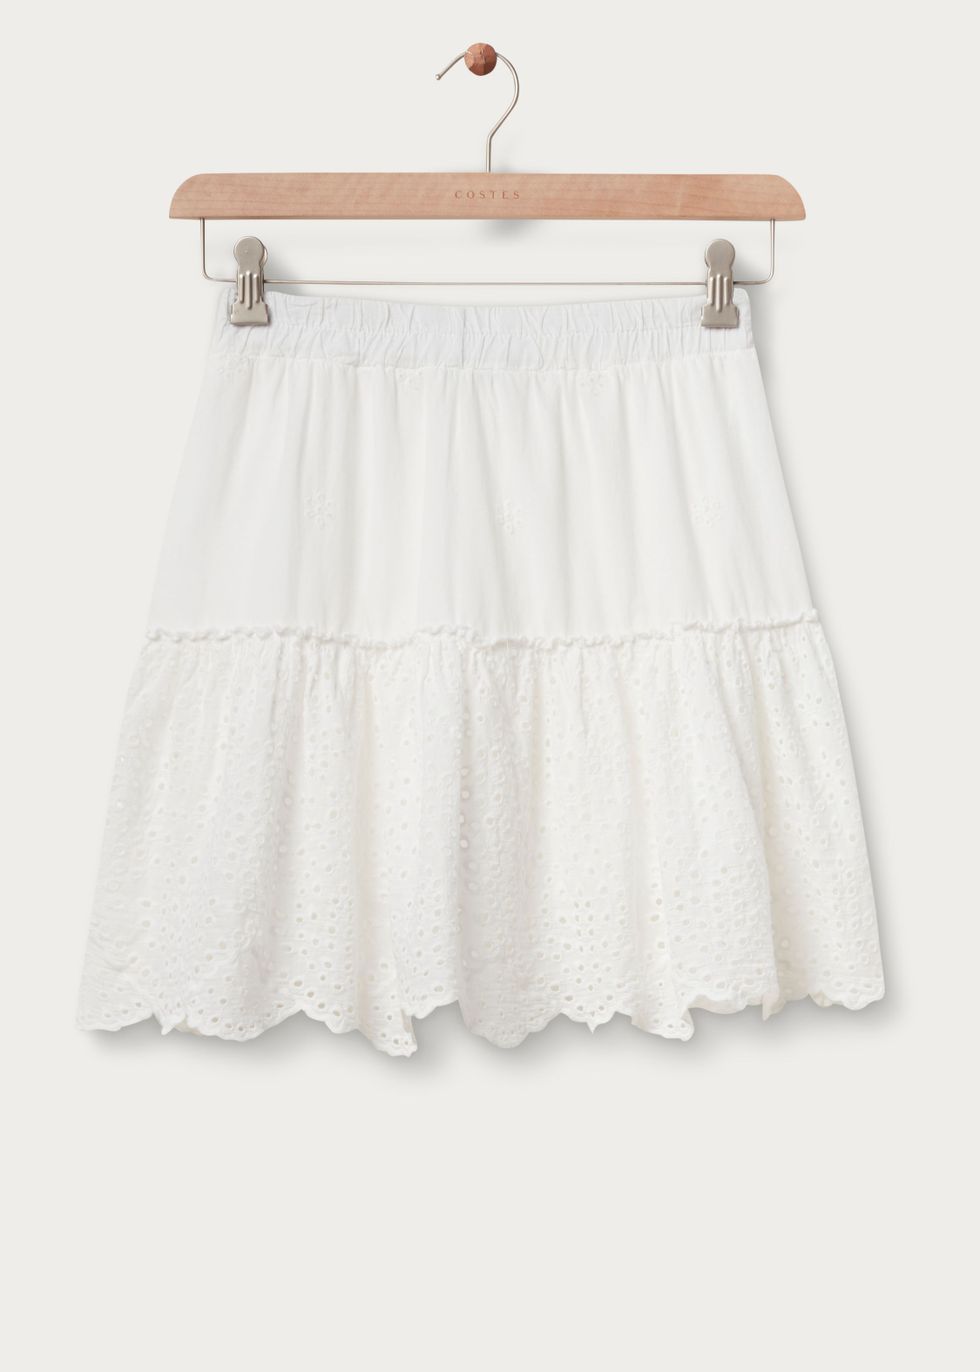 Schouderophalend Souvenir Waterig Costes Fashion | Official Webshop - Ruffle Embroidery Skirt